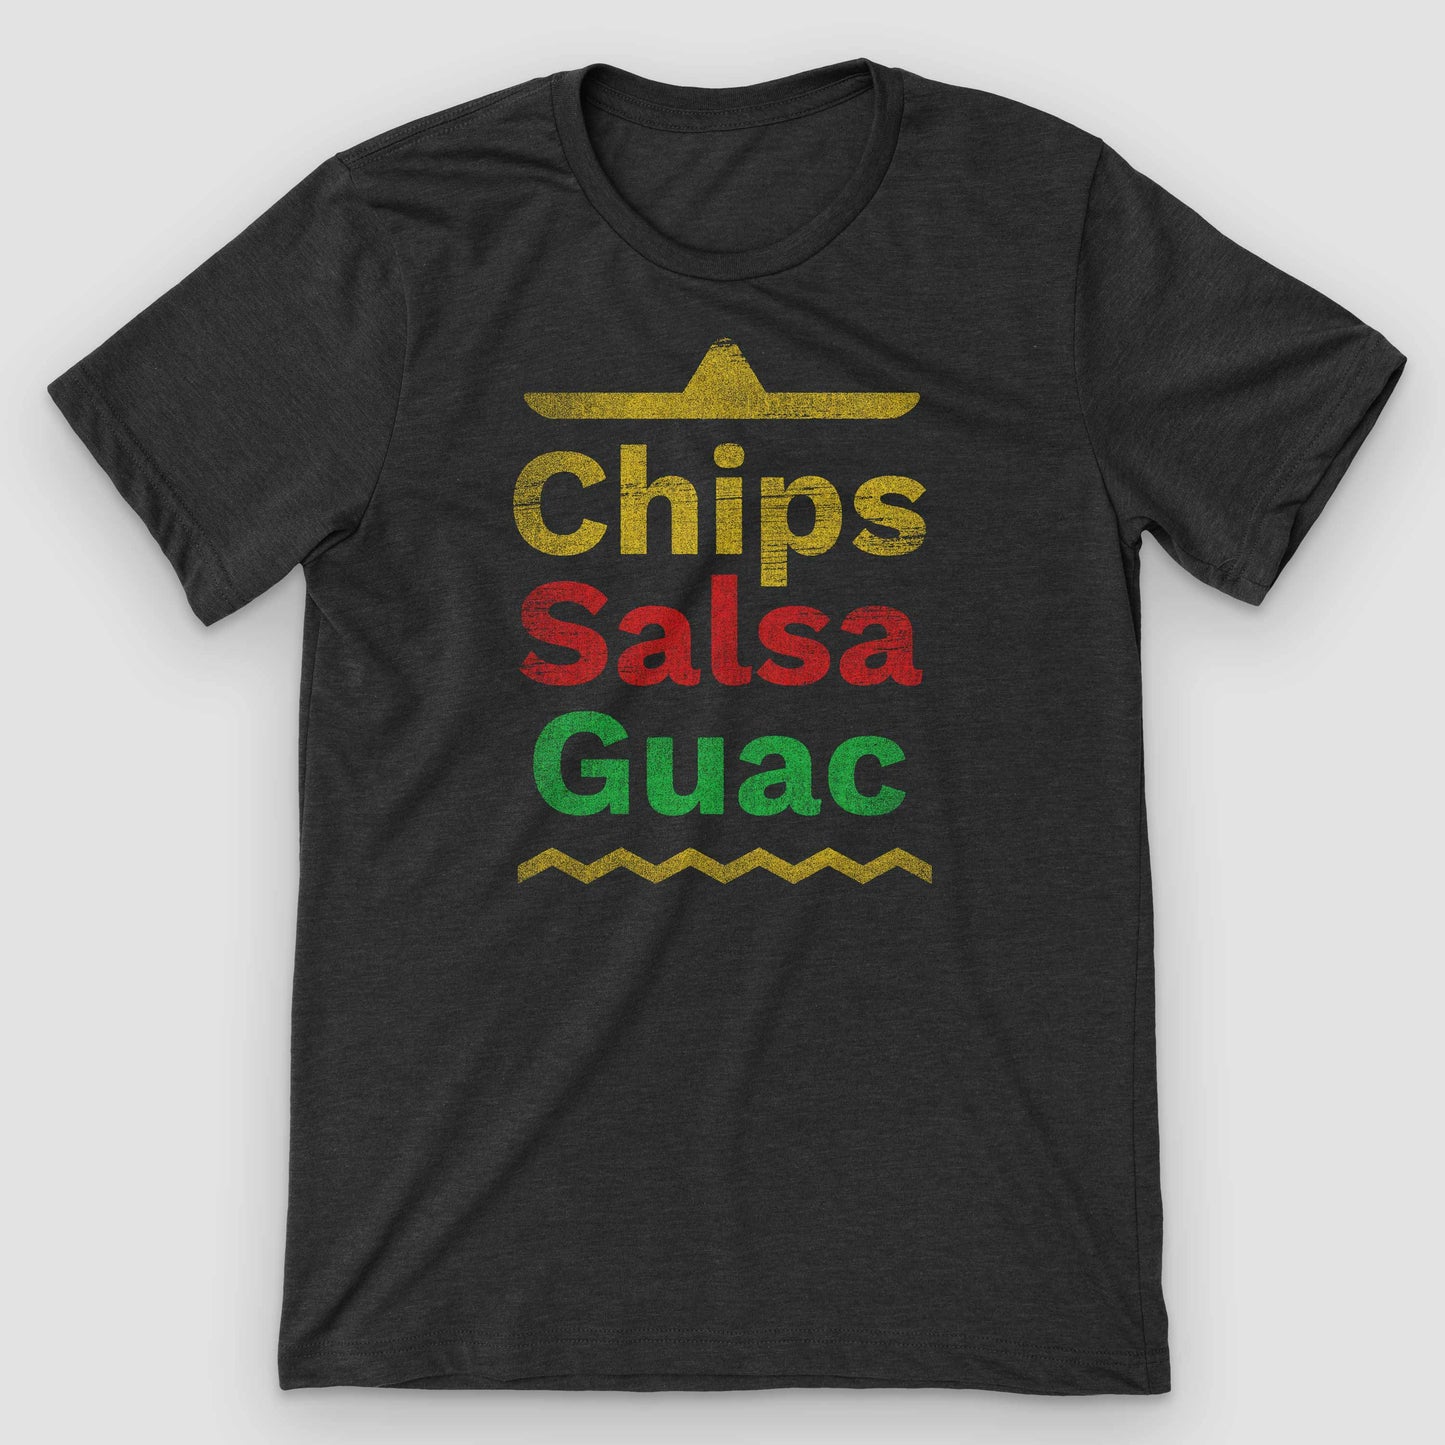  Chips Salsa Guacamole Mexican Food T-Shirt by Snaxtime